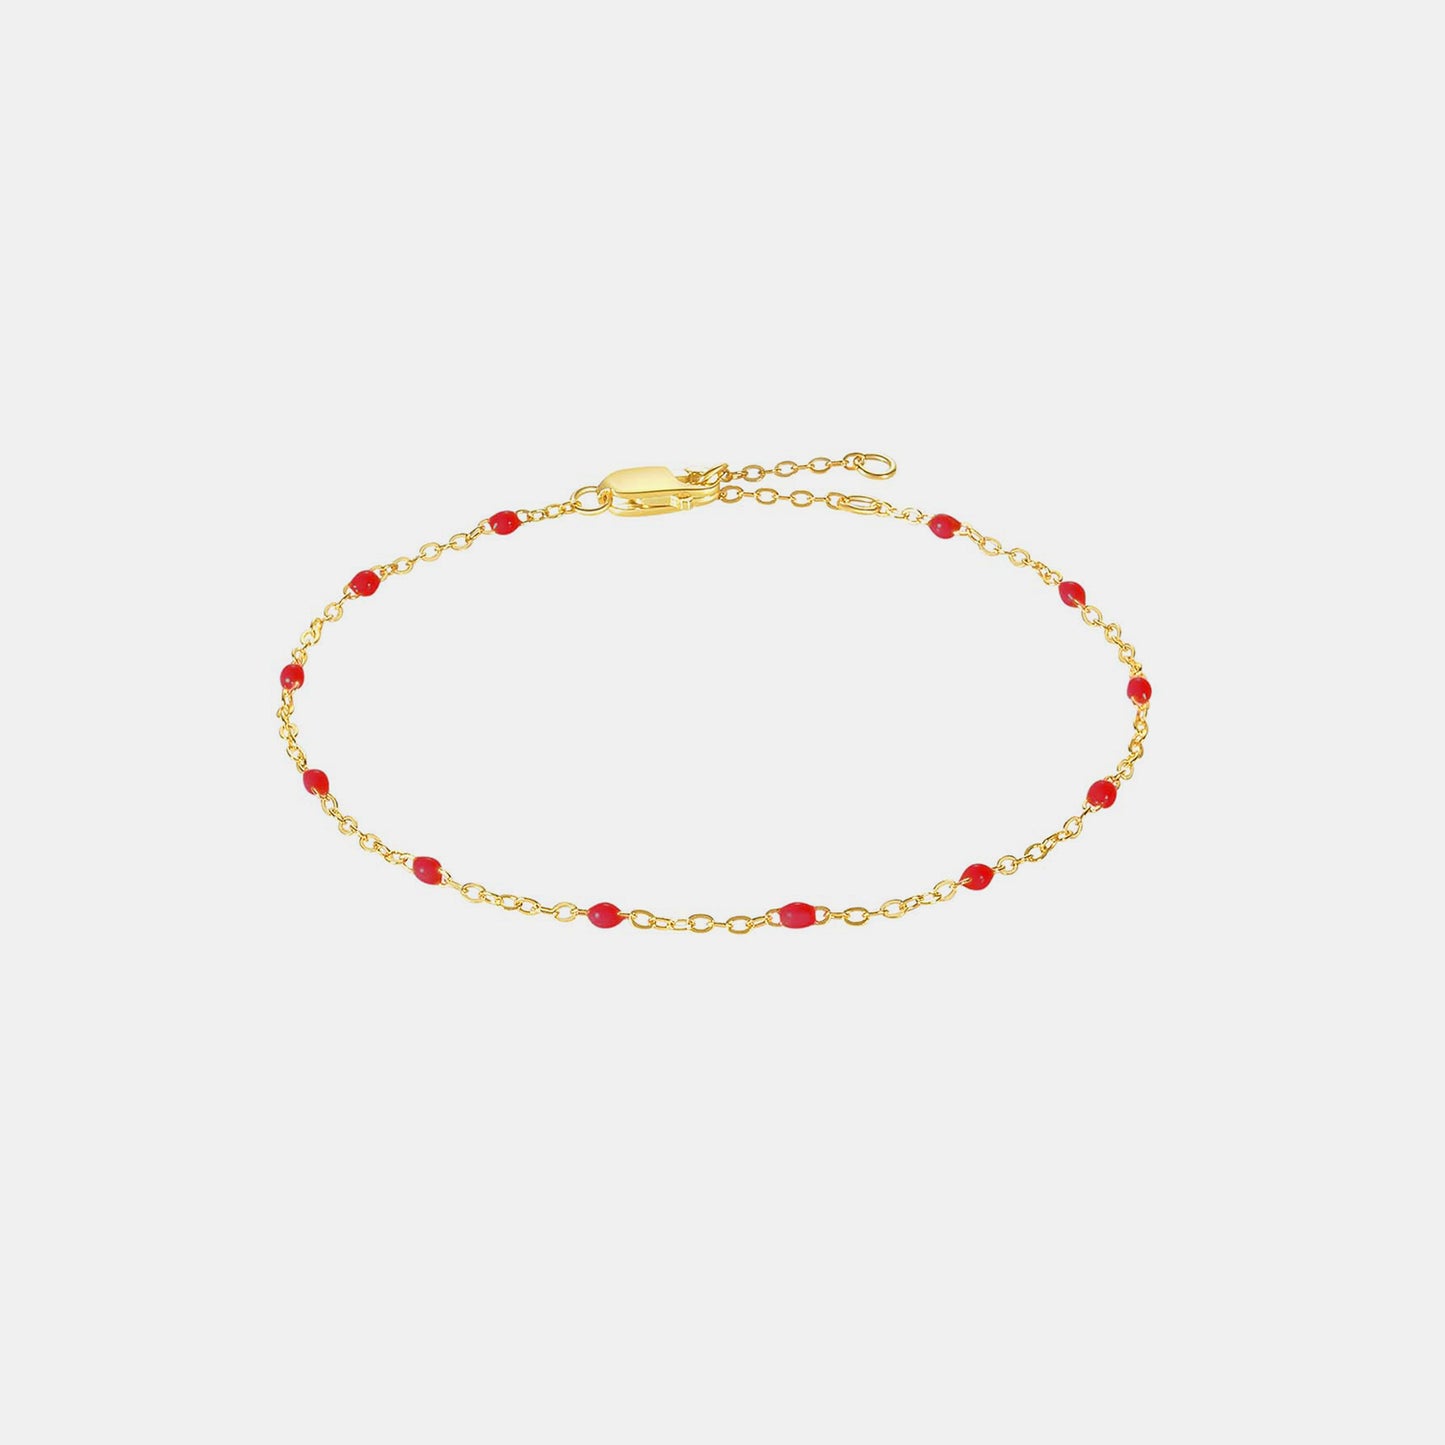 Bead 925 Sterling Silver Bracelet Gold Red One Size